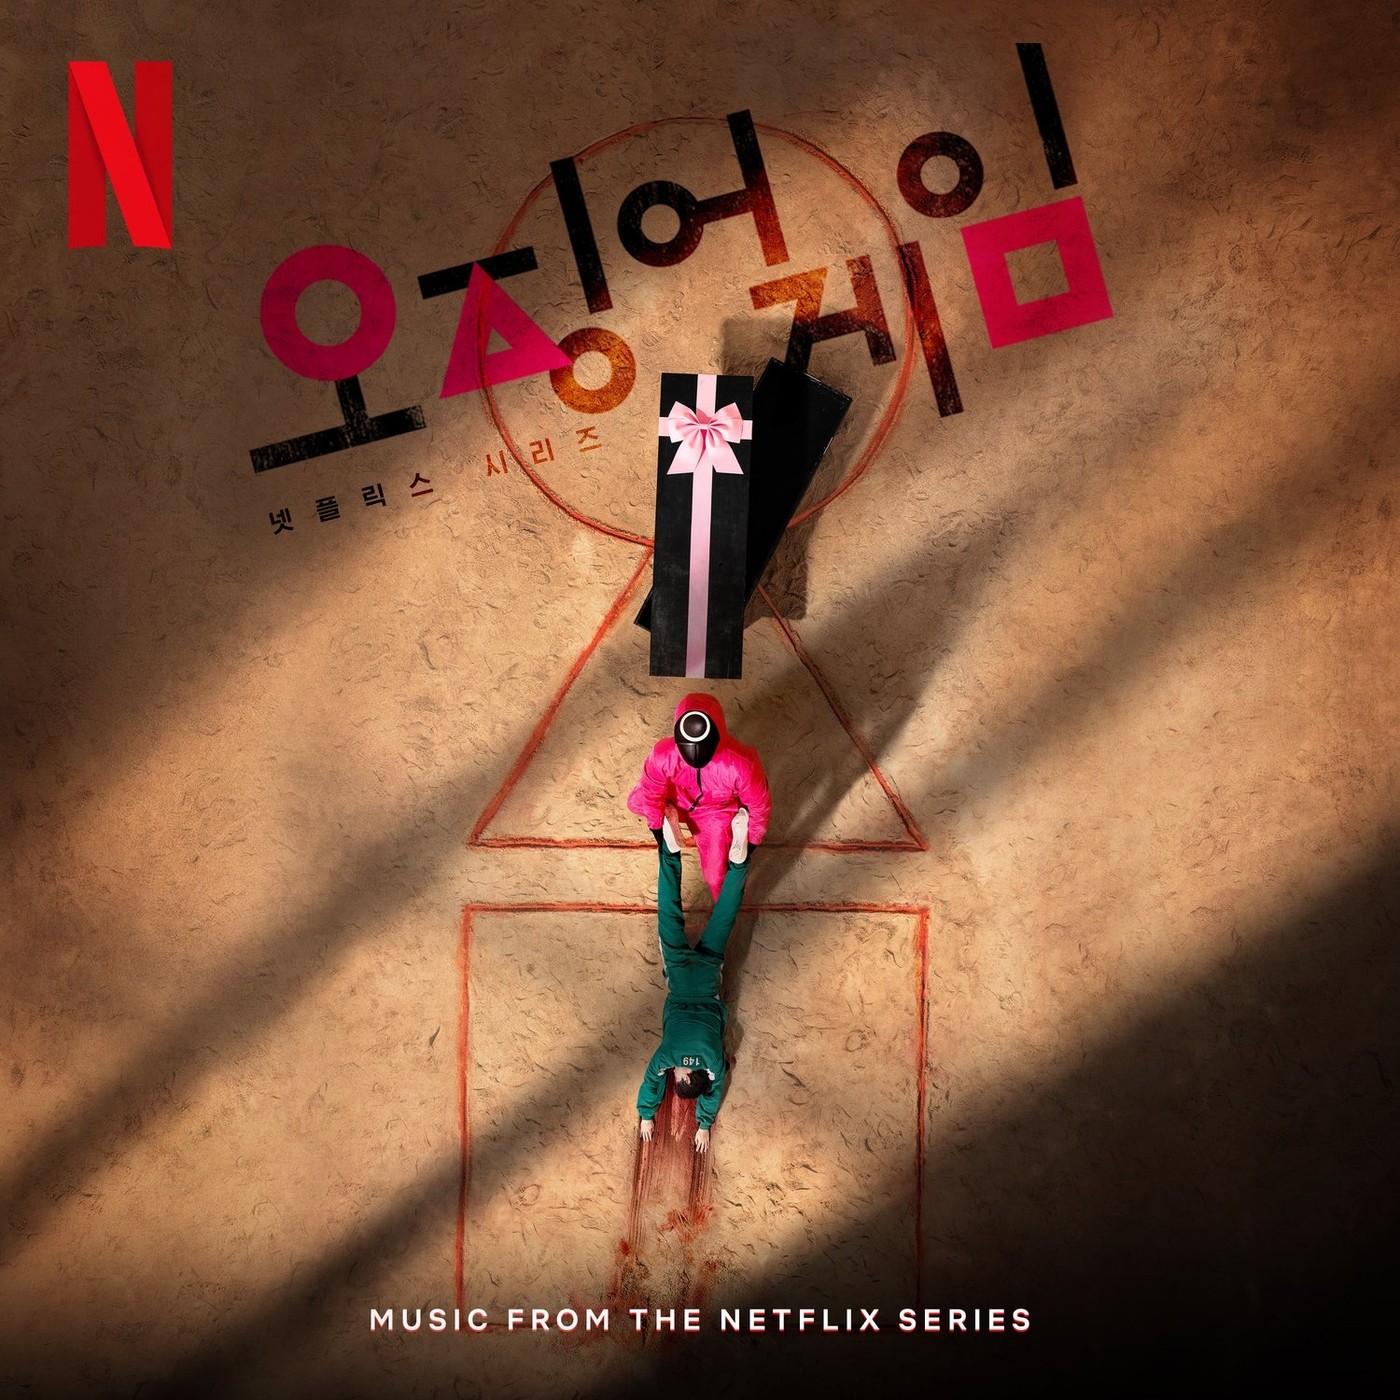 Jung Jae-il – Squid Game (Music from the Netflix Series) [FLAC / 24bit Lossless / WEB] [2021]